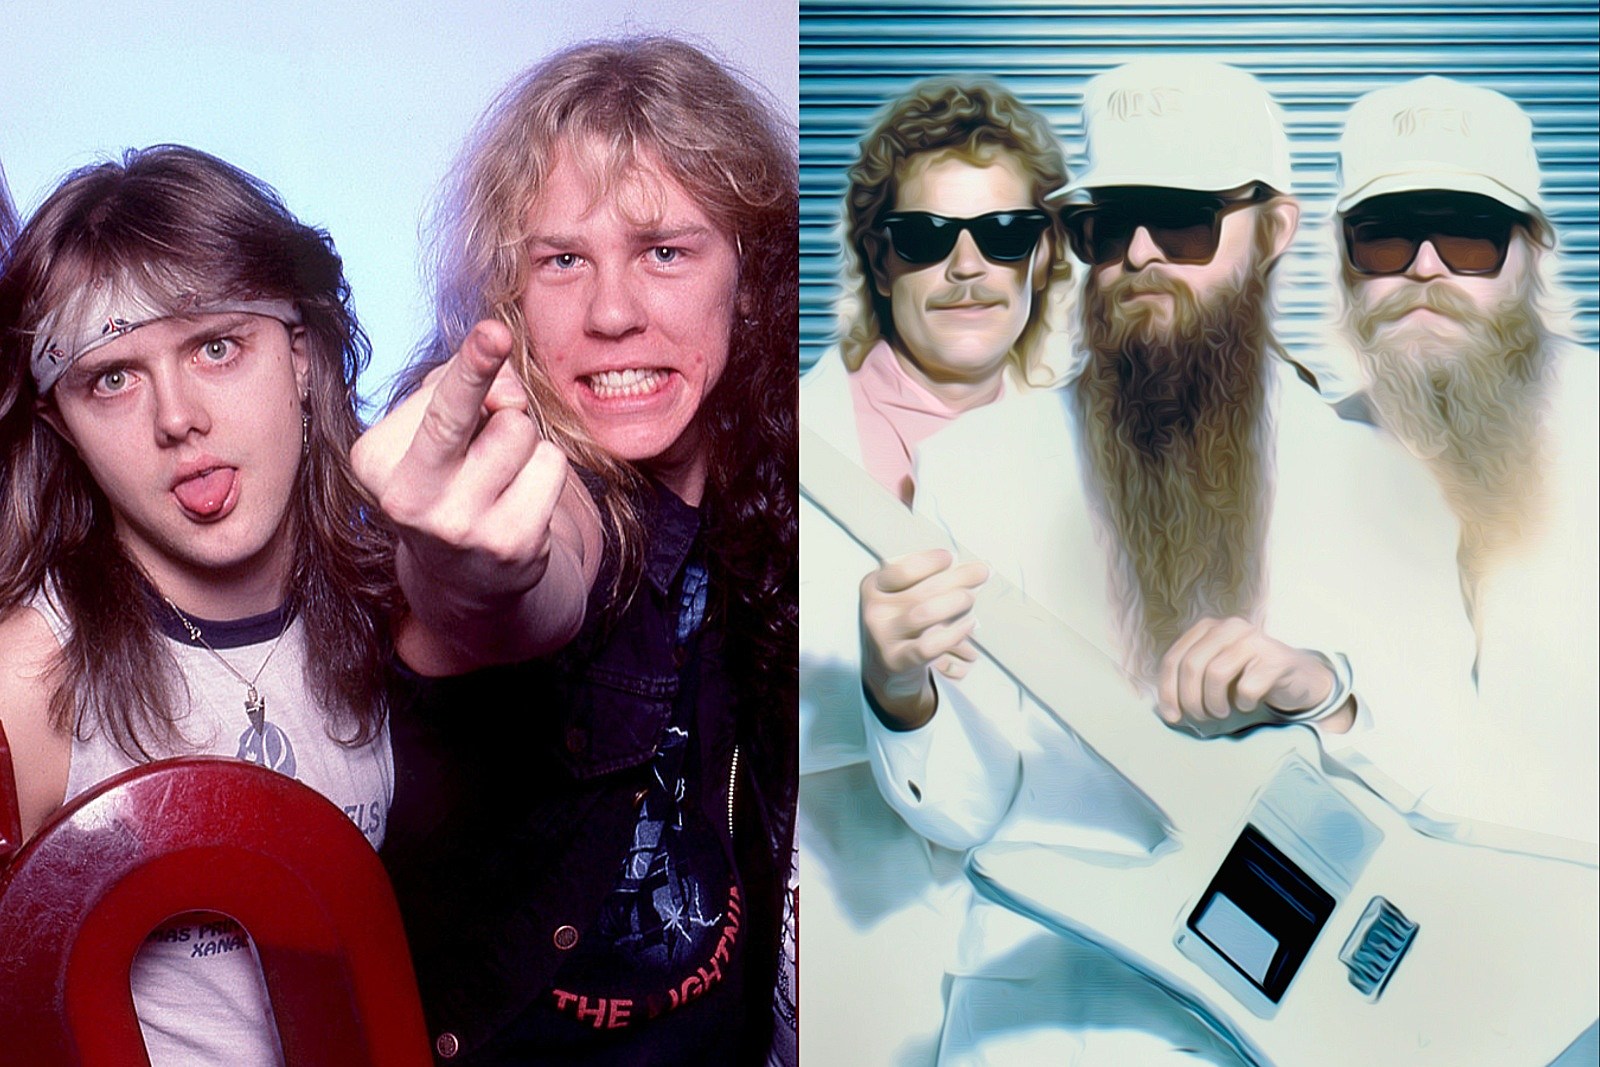 Hear Metallica’s ‘Kill ‘Em All’ Played in the Style of ZZ Top